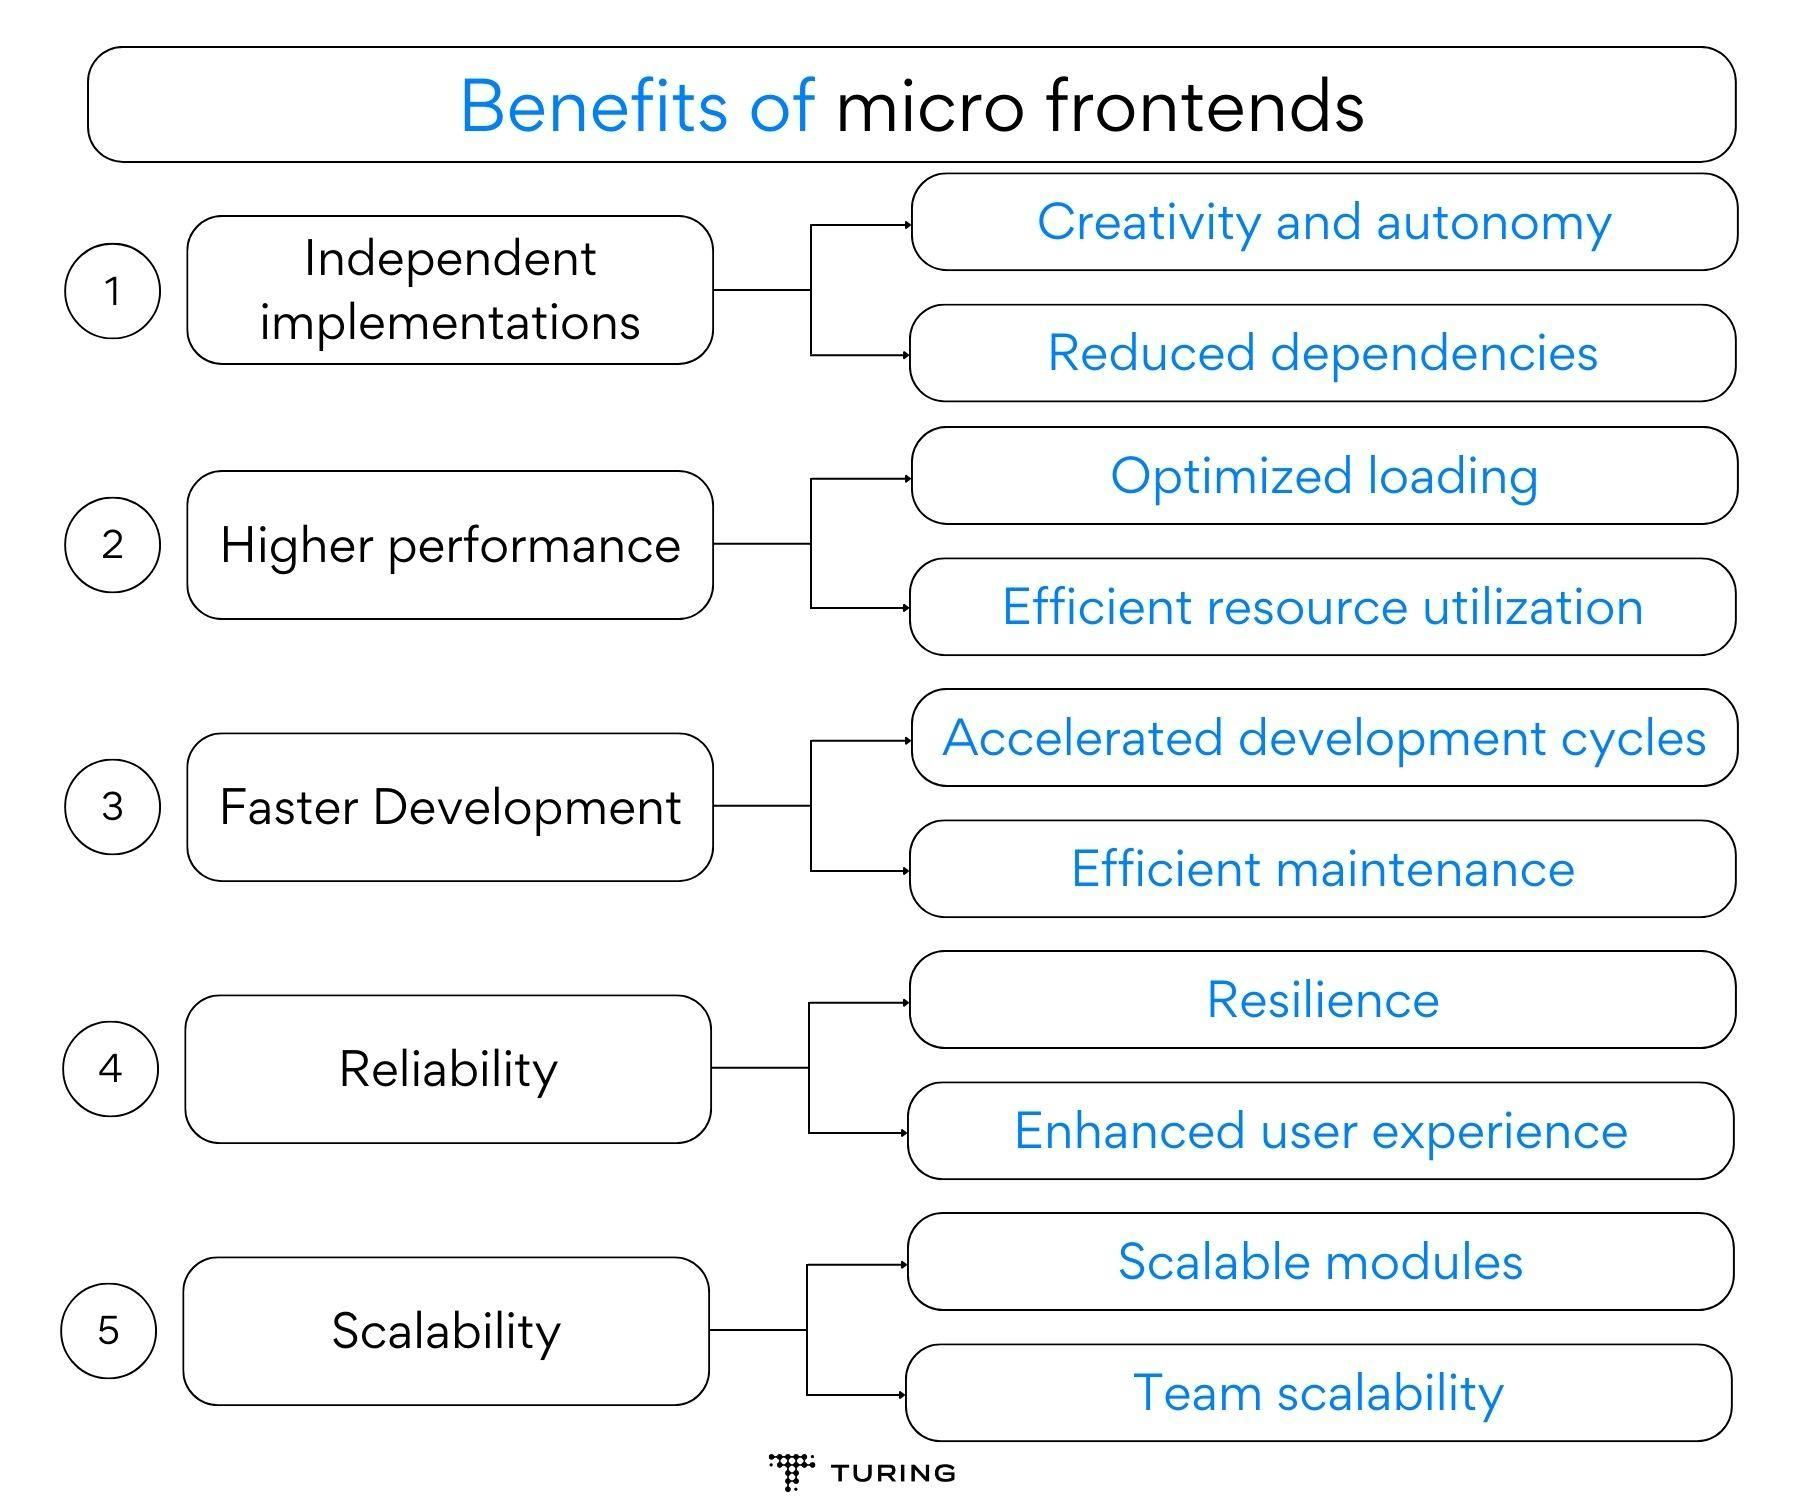 Benefits of micro frontends